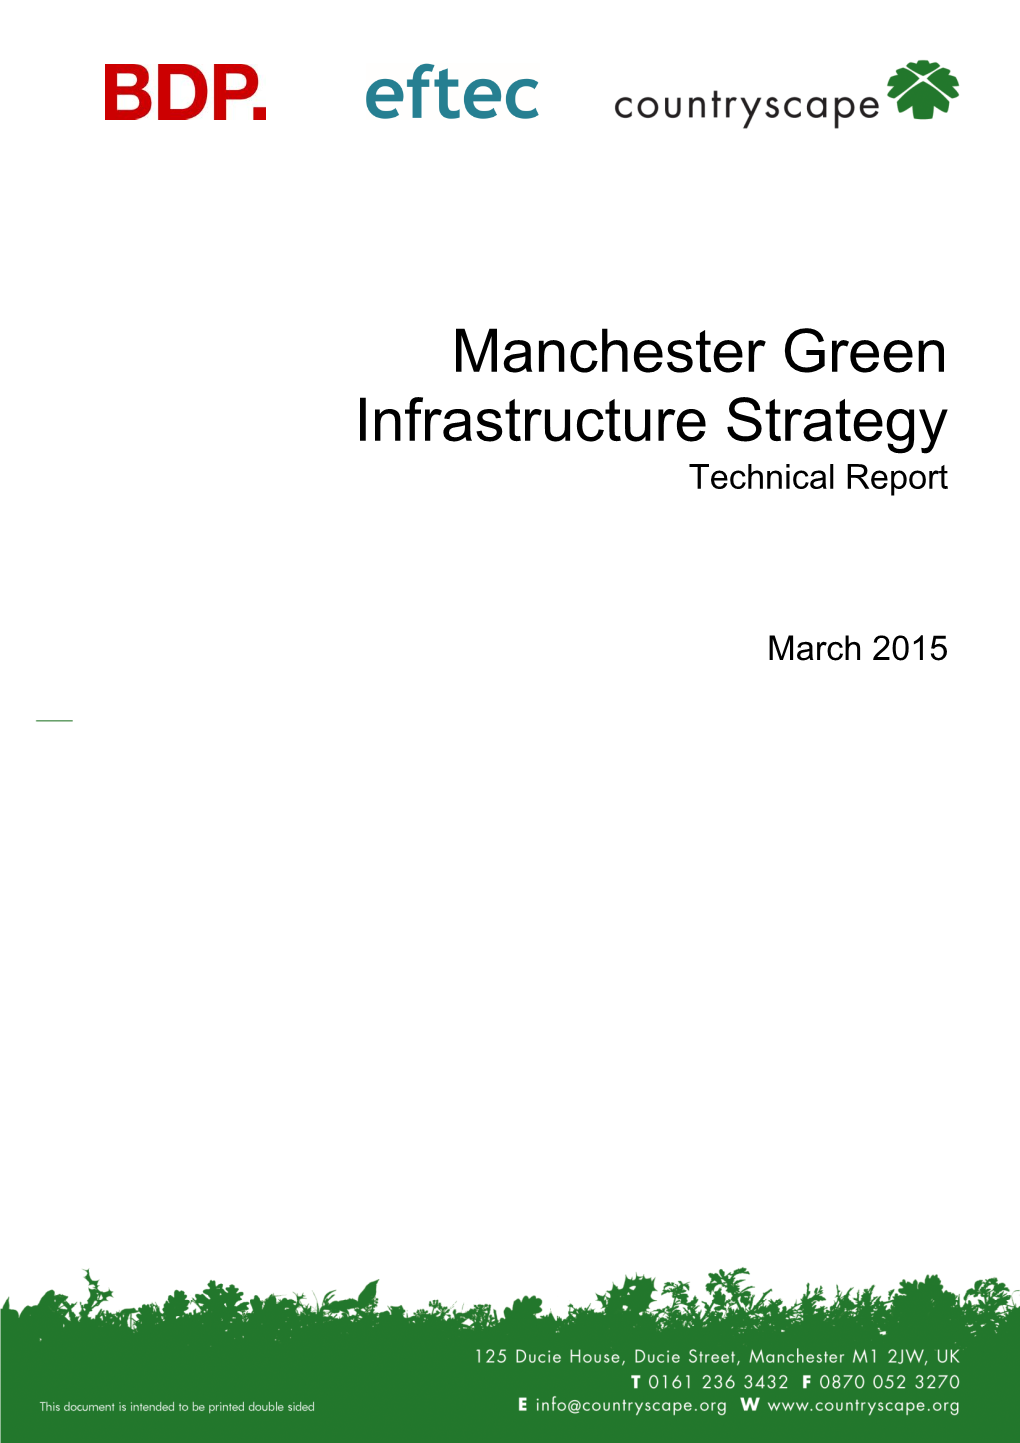 Manchester Green Infrastructure Strategy Technical Report